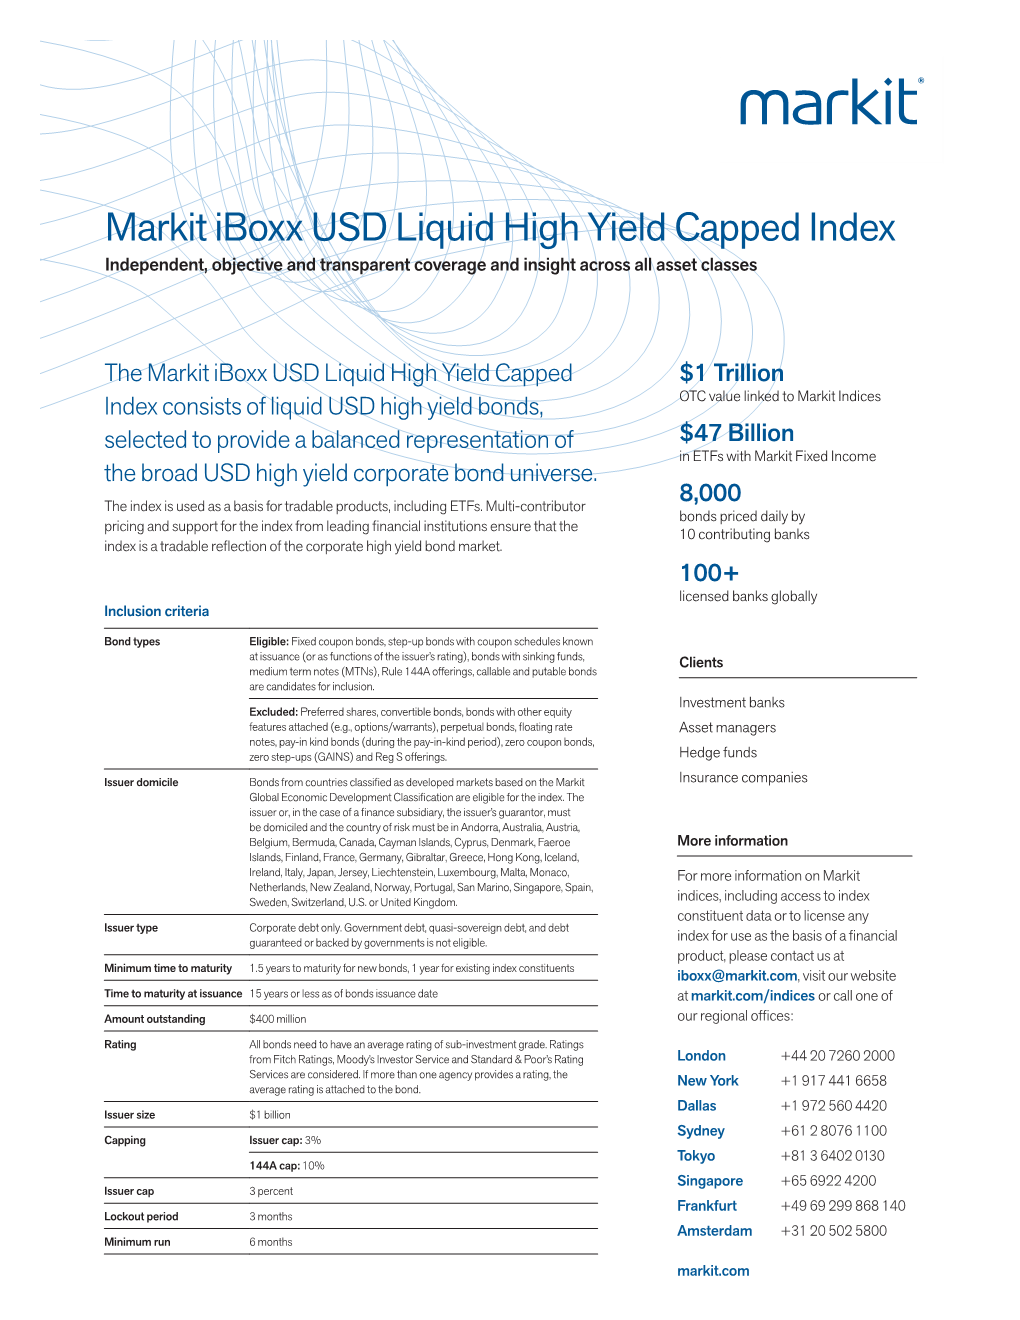 Markit Iboxx USD Liquid High Yield Capped Index Independent, Objective and Transparent Coverage and Insight Across All Asset Classes